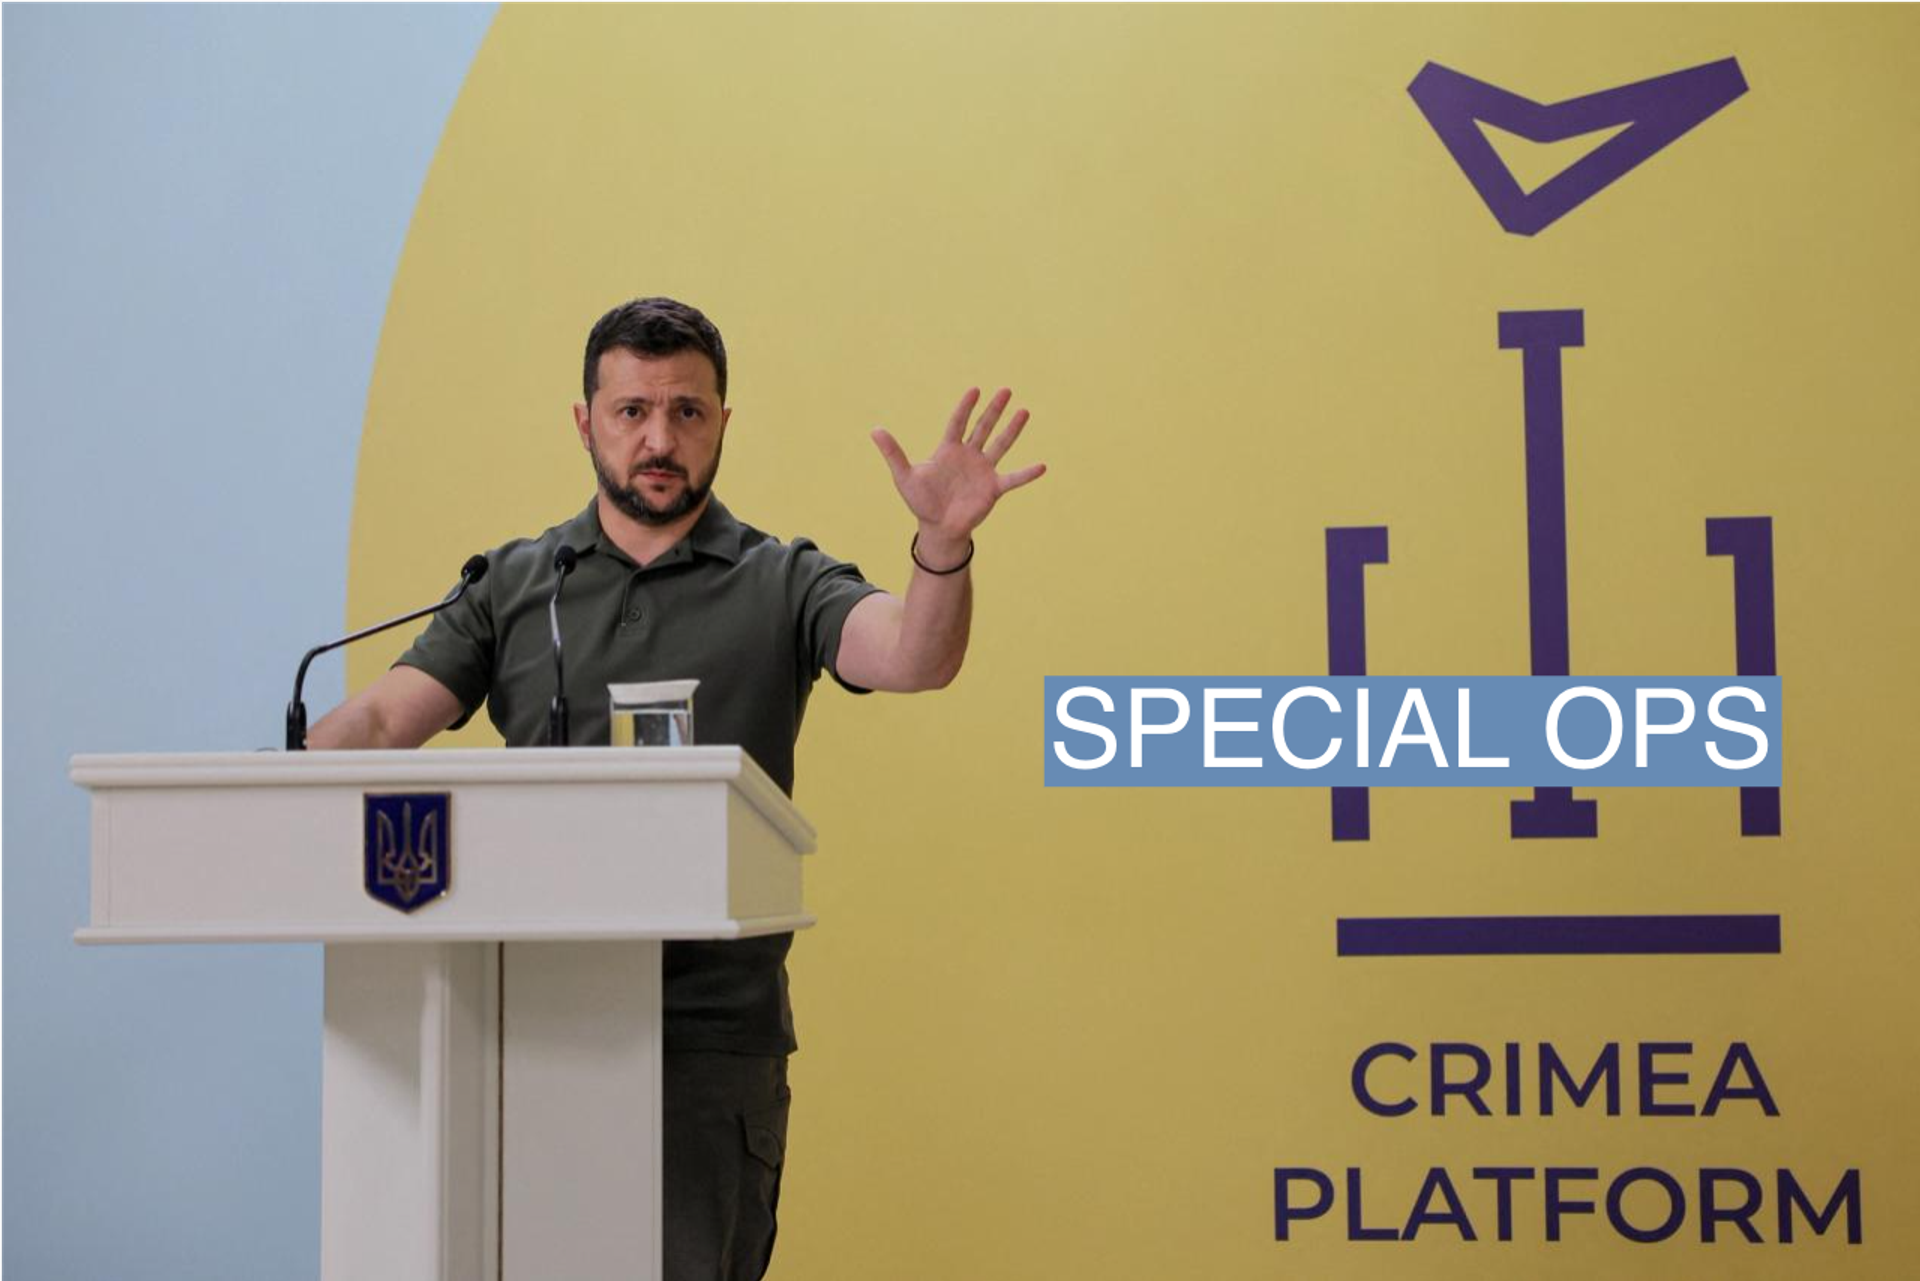 Ukrainian President Volodymyr Zelensky speaks at the press conference after the opening session of Crimea Platform conference in Kyiv, Ukraine, 23 August 2023. The Crimea Platform – is an international consultation and coordination format initiated by Ukraine. OLEG PETRASYUK/Pool via REUTERS